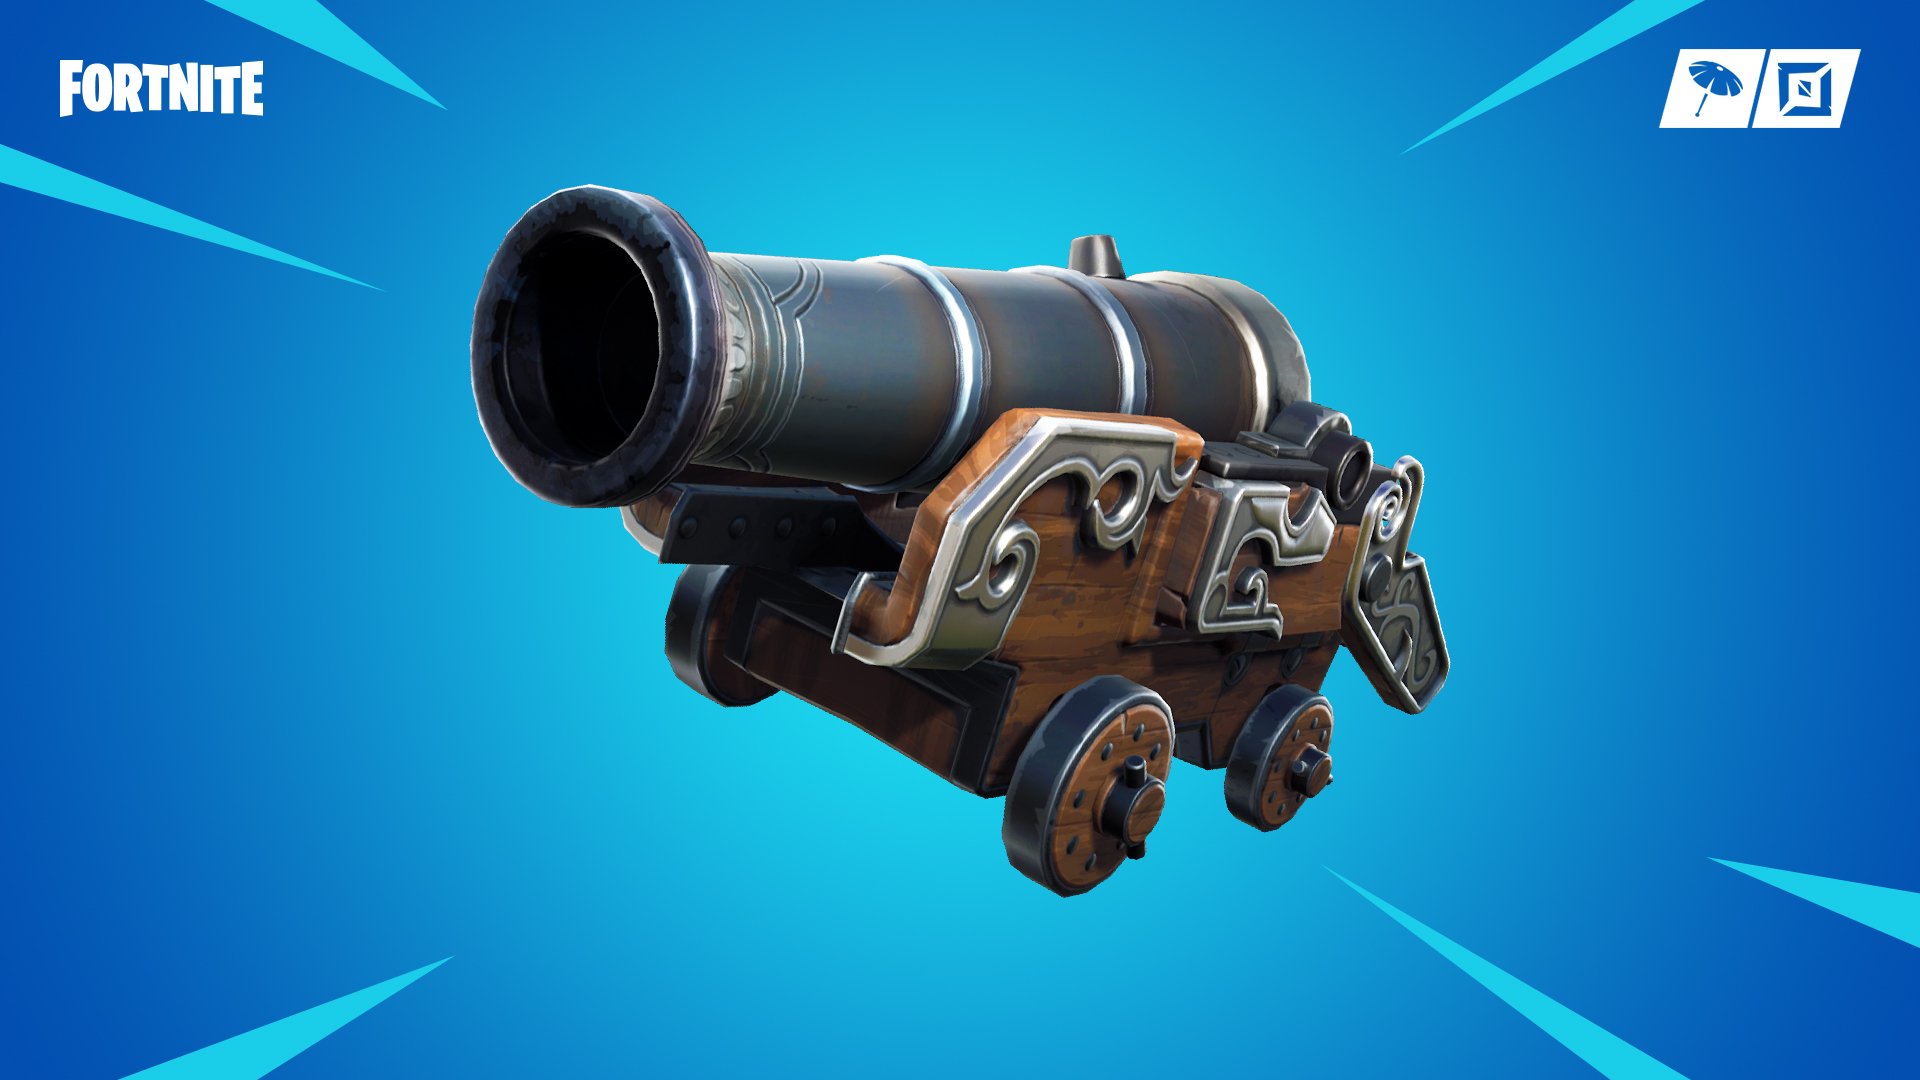 fortnite s season 8 week 10 challenges will have players loading themselves into a pirate cannon and firing through three flaming hoops - all pirate cannon locations fortnite